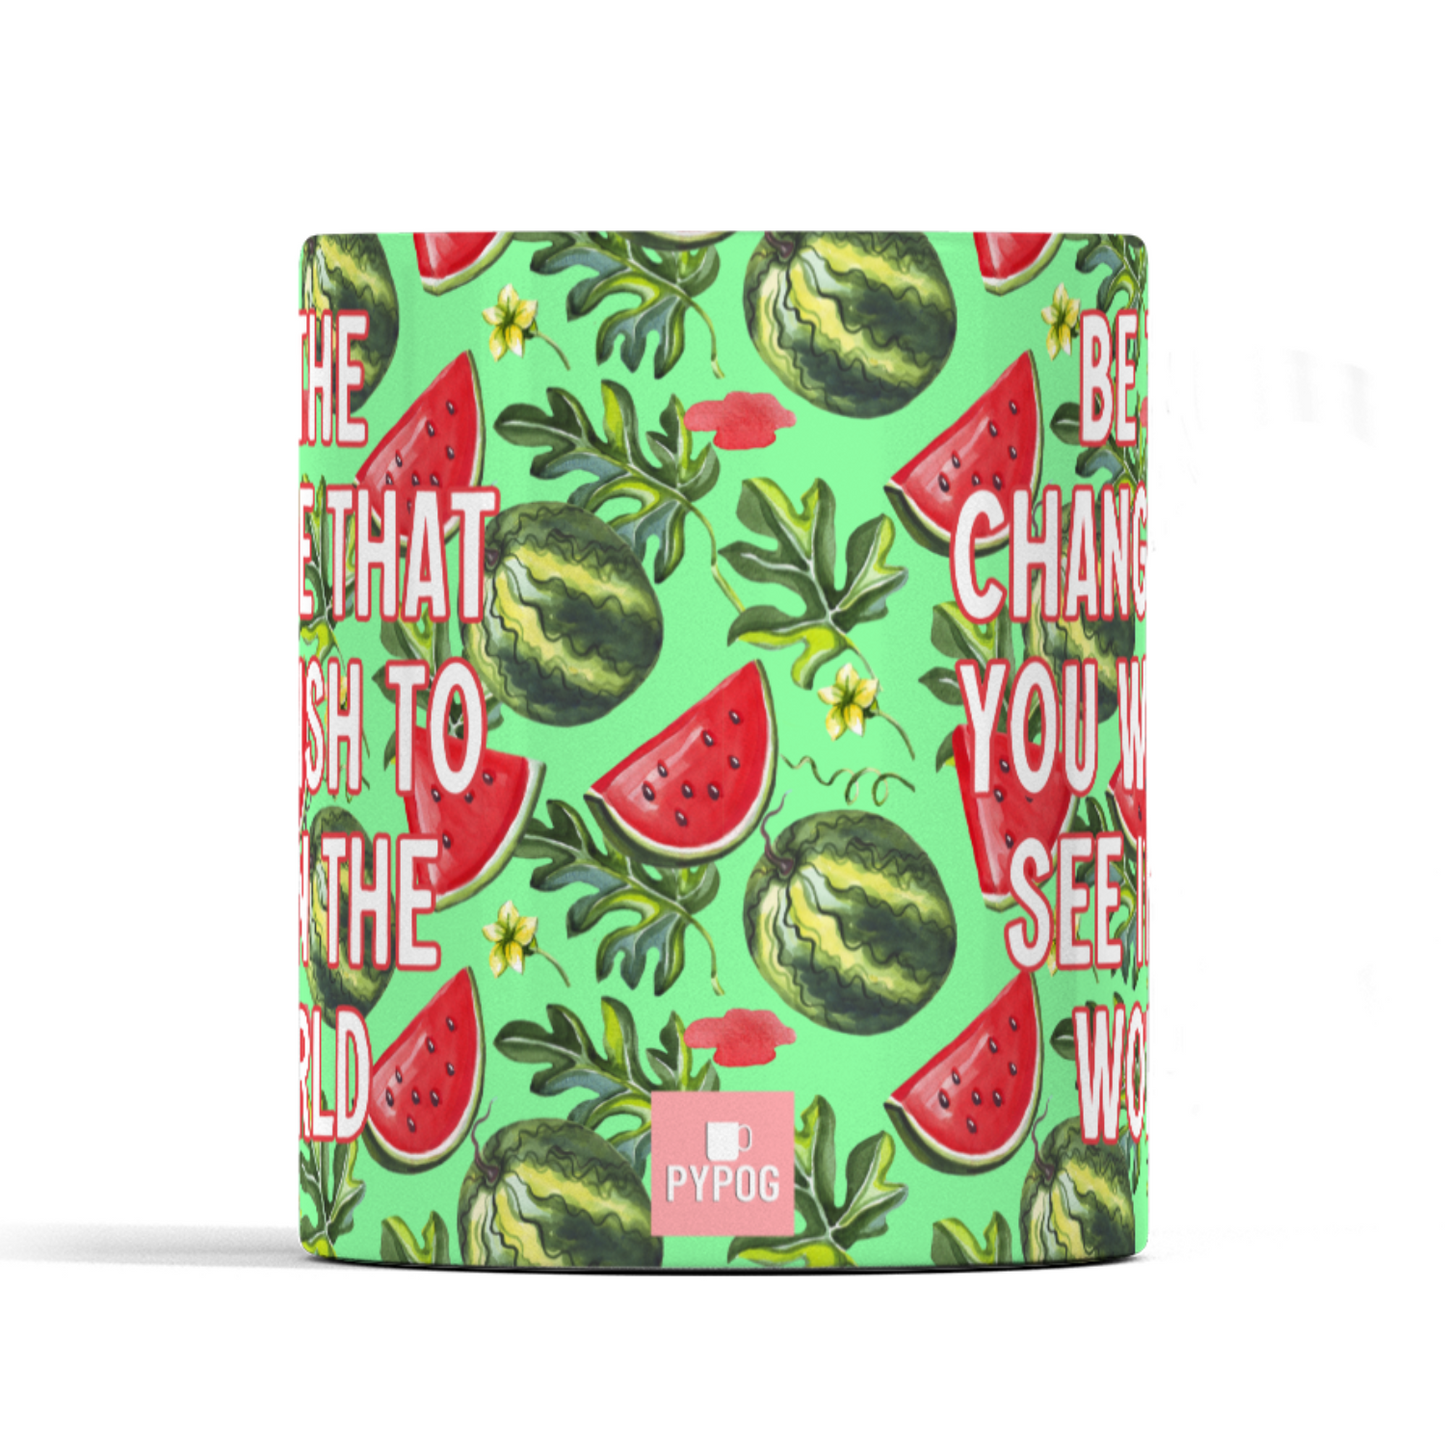 Be the change you wish to see in the world watermelon positive quote mug